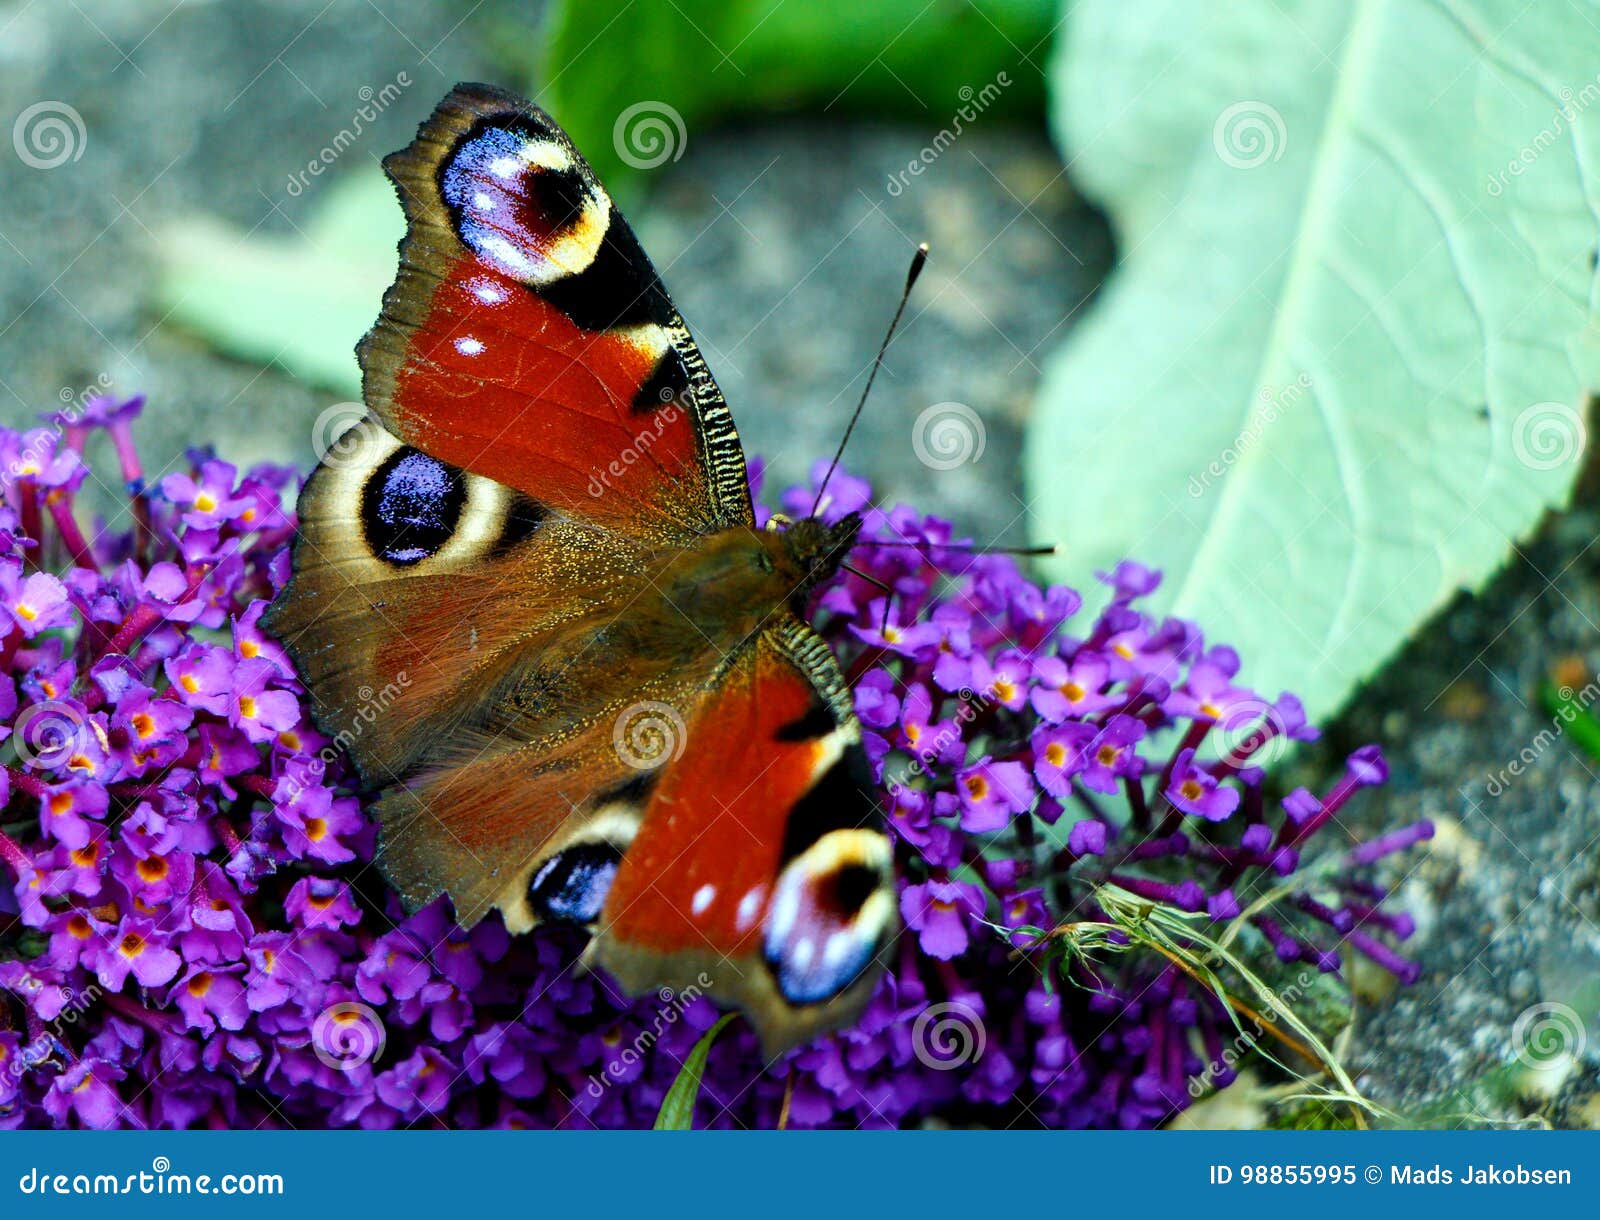 Peacock Butterfly Eating on a Flower Stock Image - Image of outdoor ...